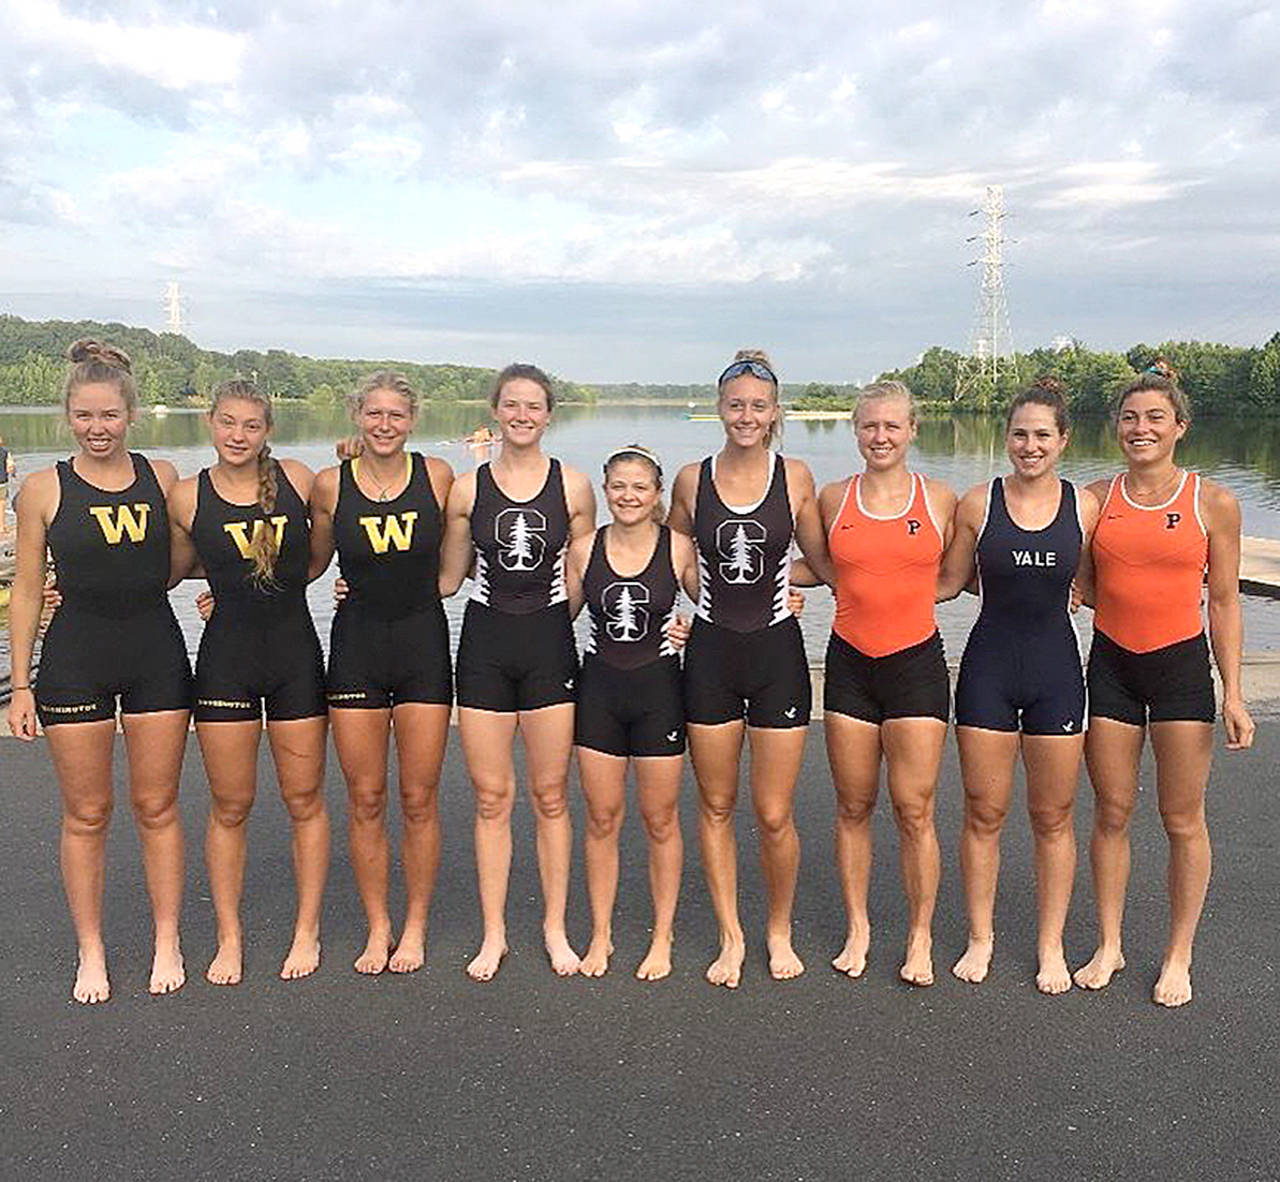 Sequim’s Elise Beuke, second from left, is rowing for Team USA at the U-23 World Championships in Poland Wednesday through Sunday. She and her teammates are raising funds to cover expenses.